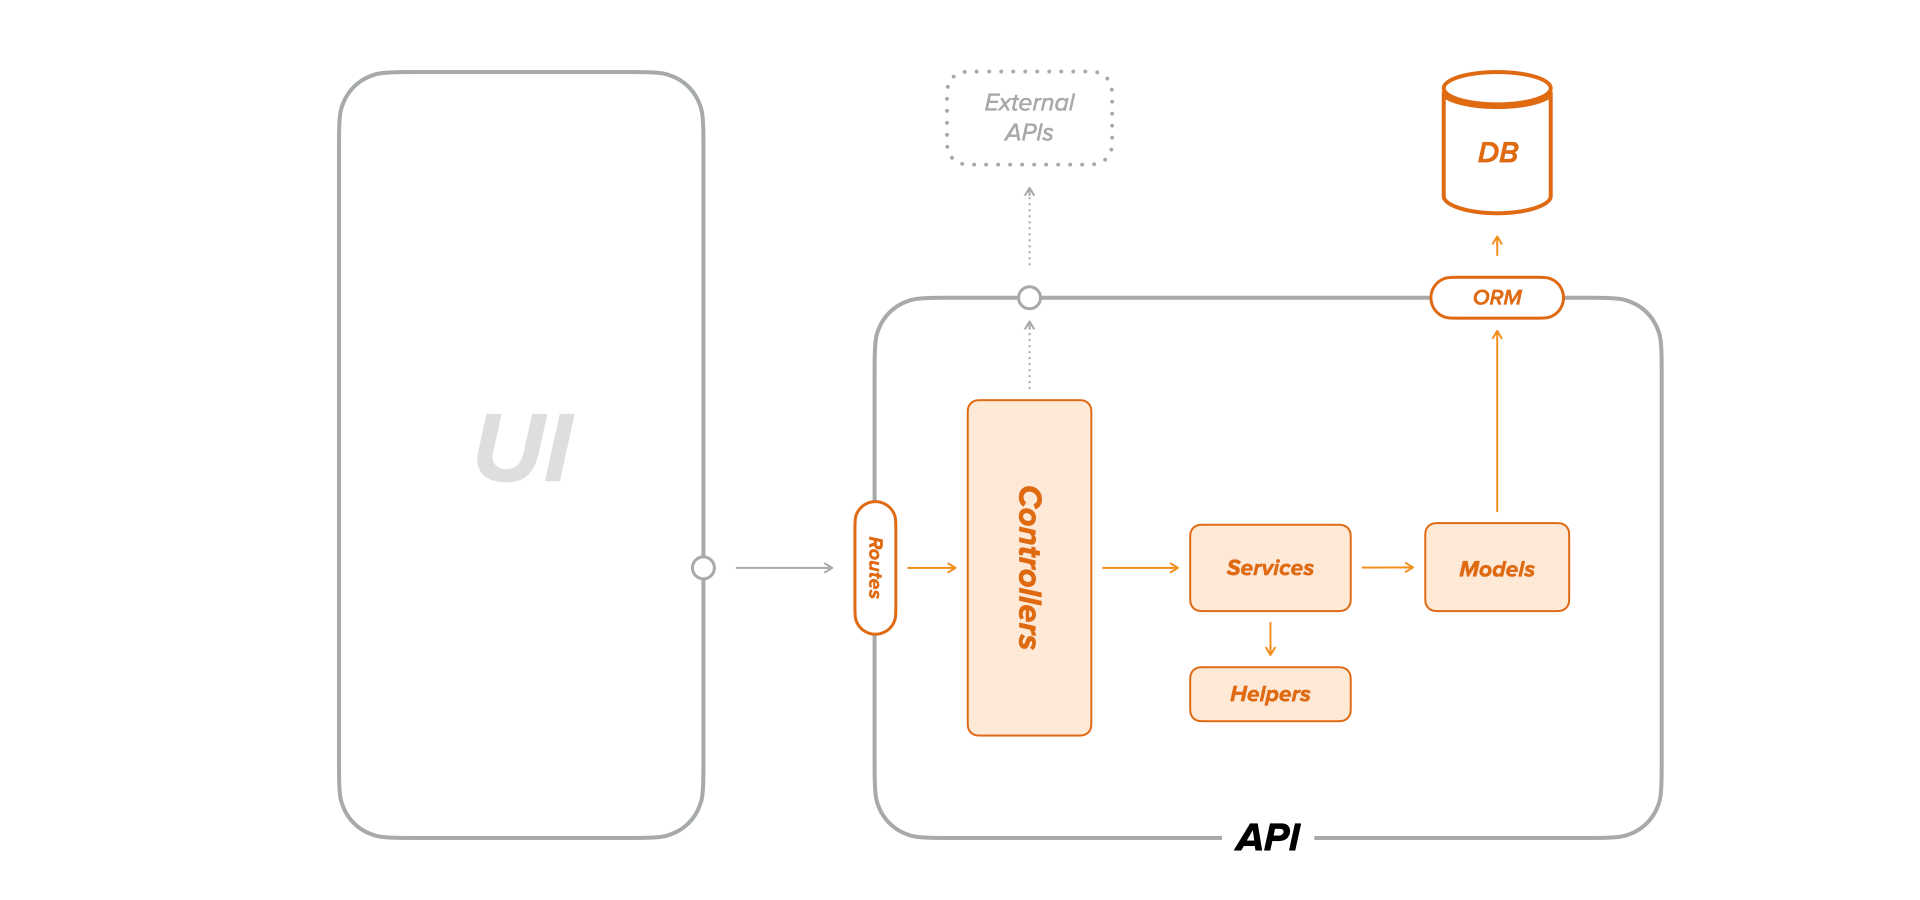 A detalied architecture diagram, highlighting the full integration of the API subcomponents, including the database, when testing API endpoints.